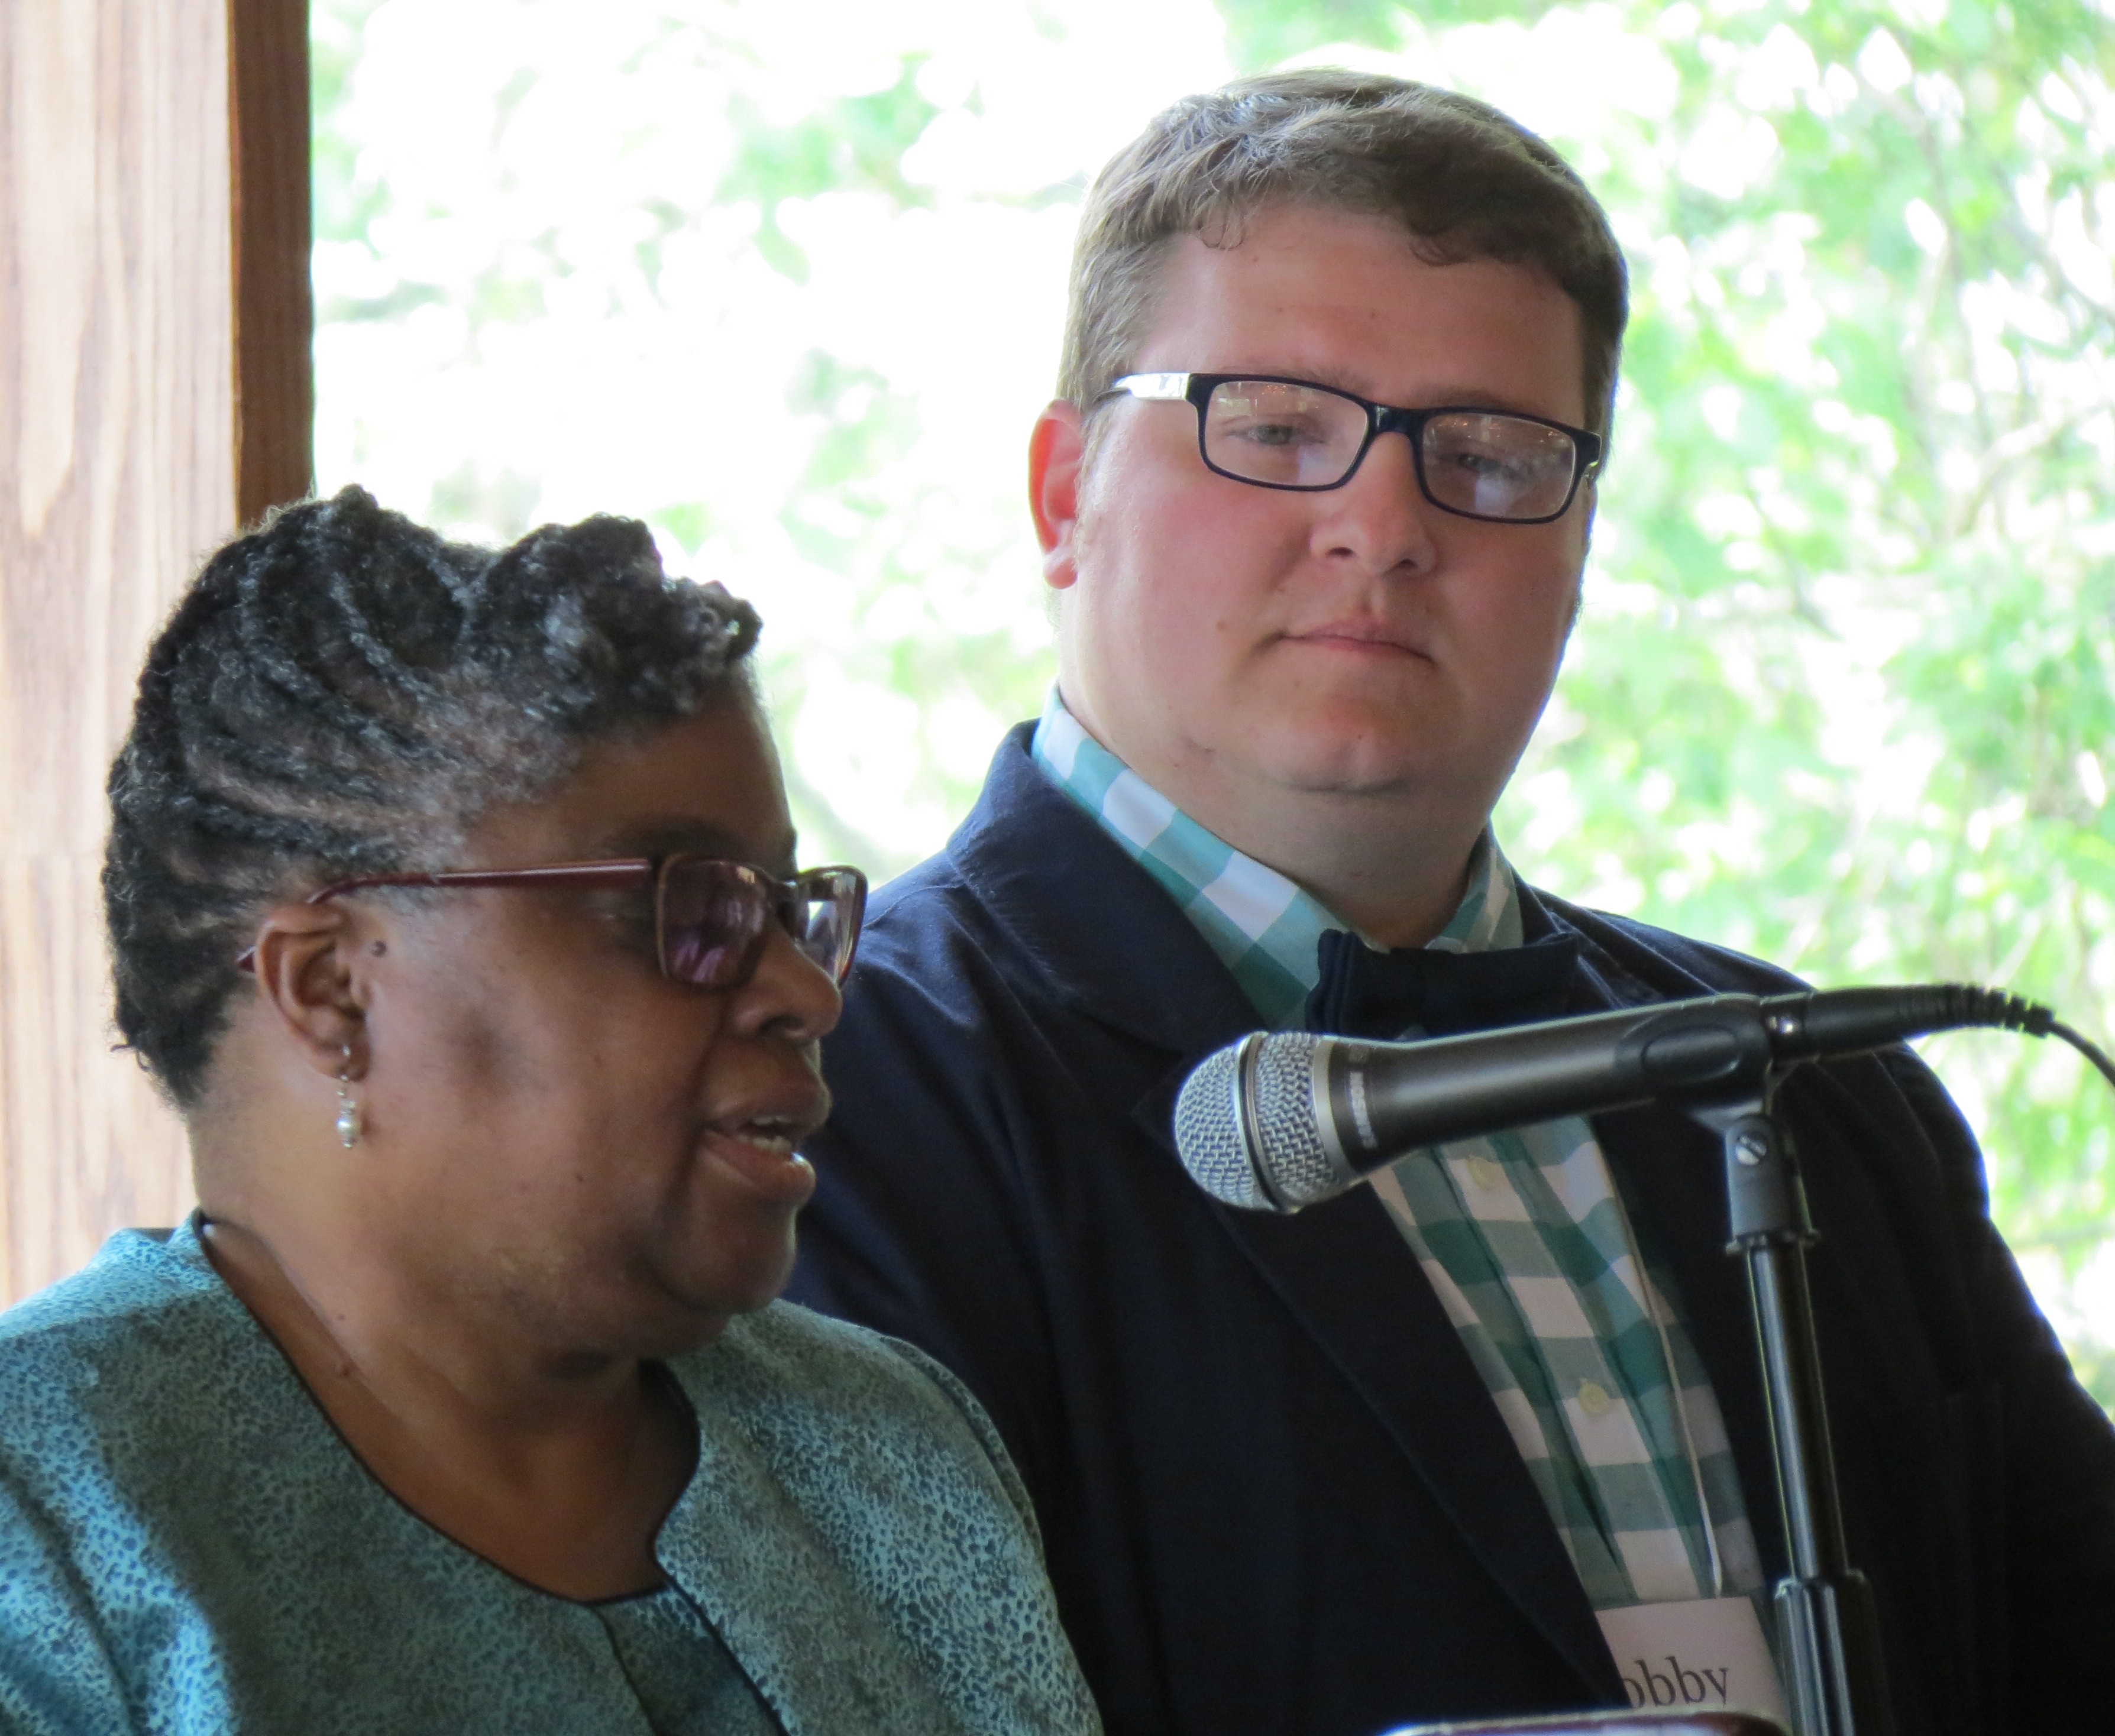 A woman speaking into a microphone, and a man looking at her